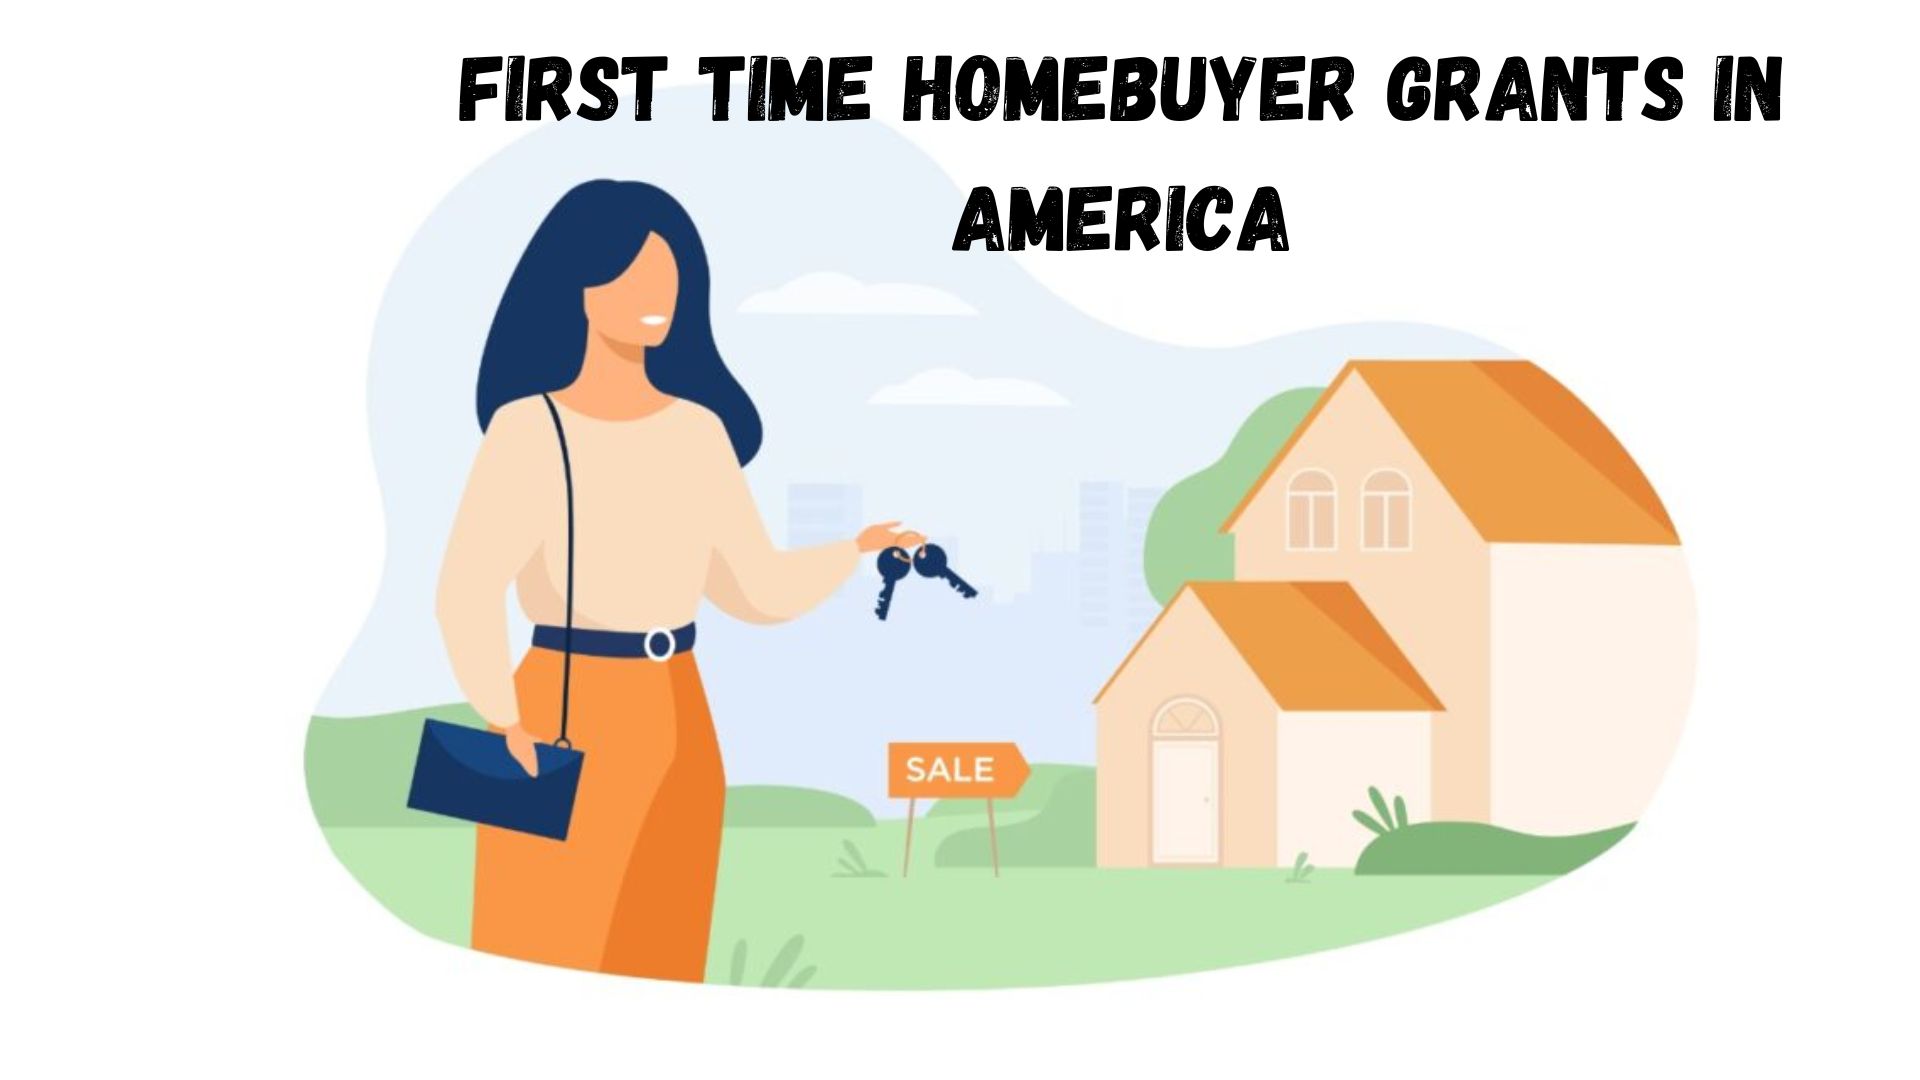 First Time Homebuyer Grants in America.